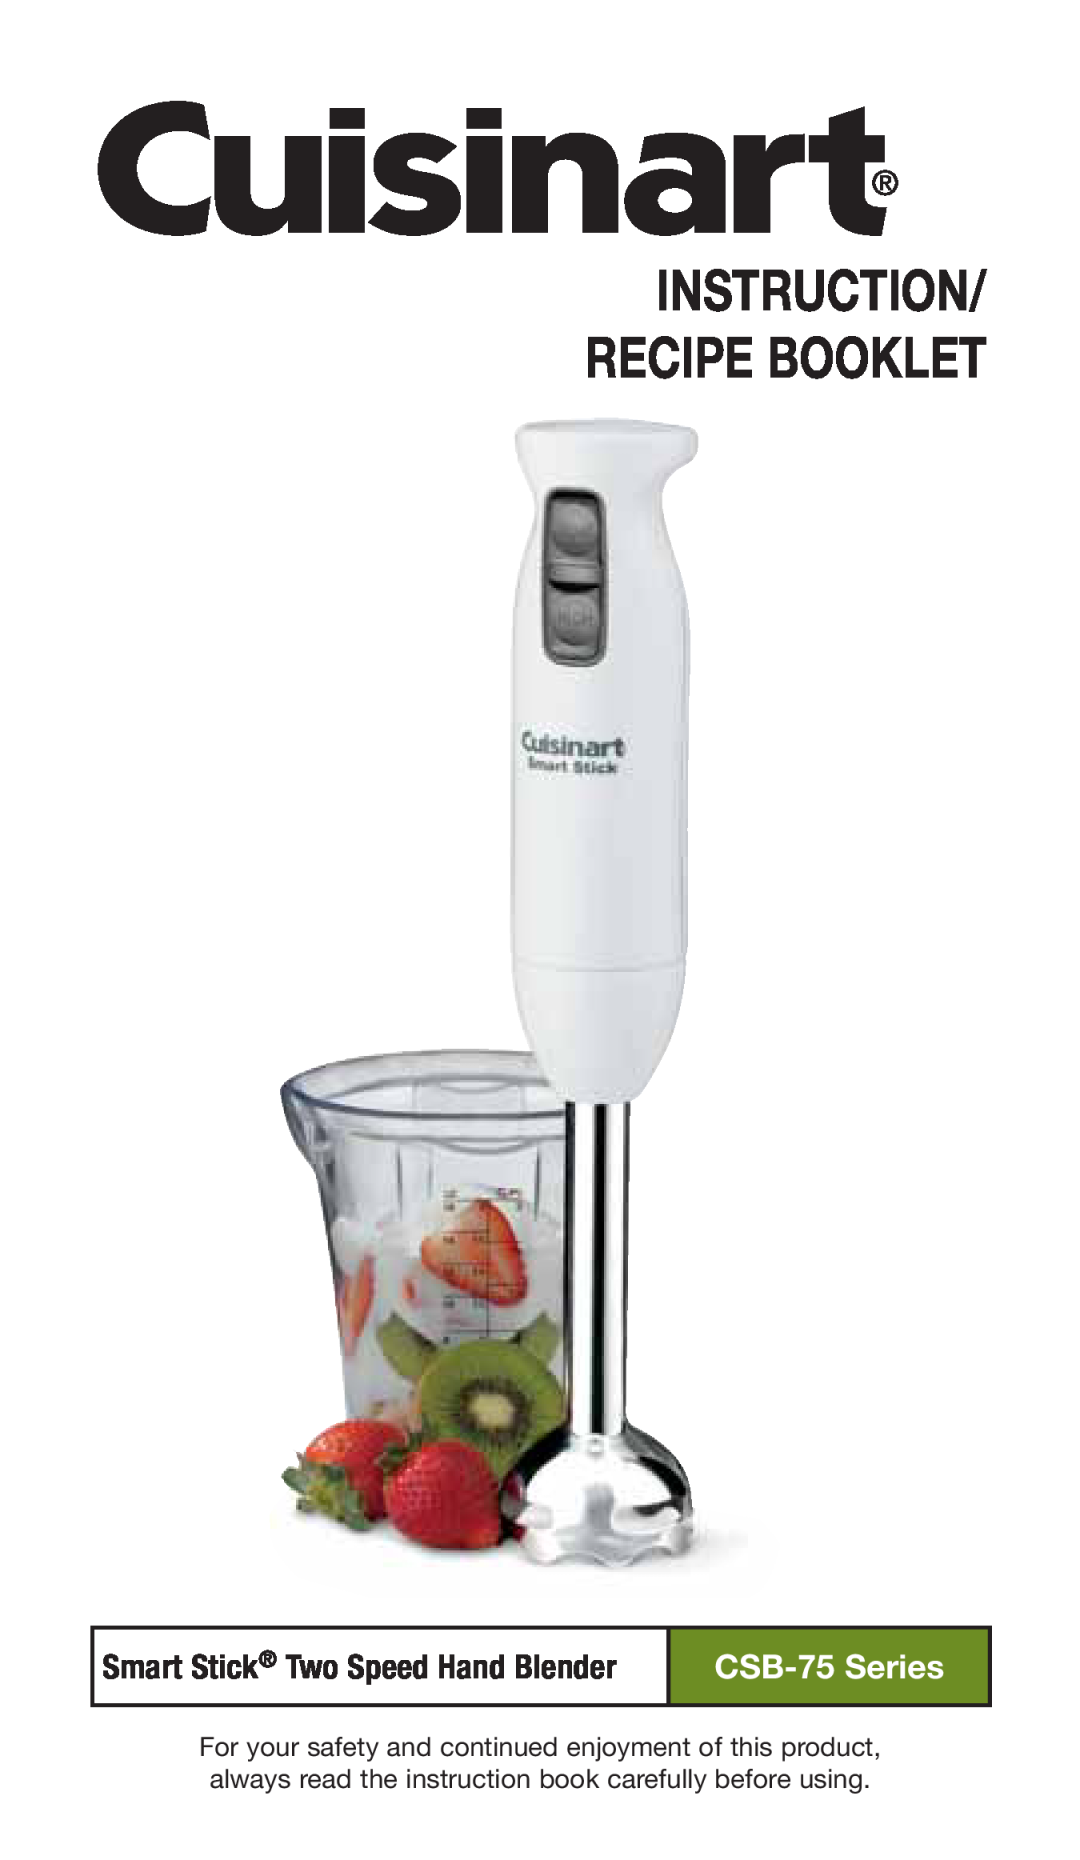 Cuisinart manual Instruction/ Recipe Booklet, Smart Stick Two Speed Hand Blender, CSB-75 Series 